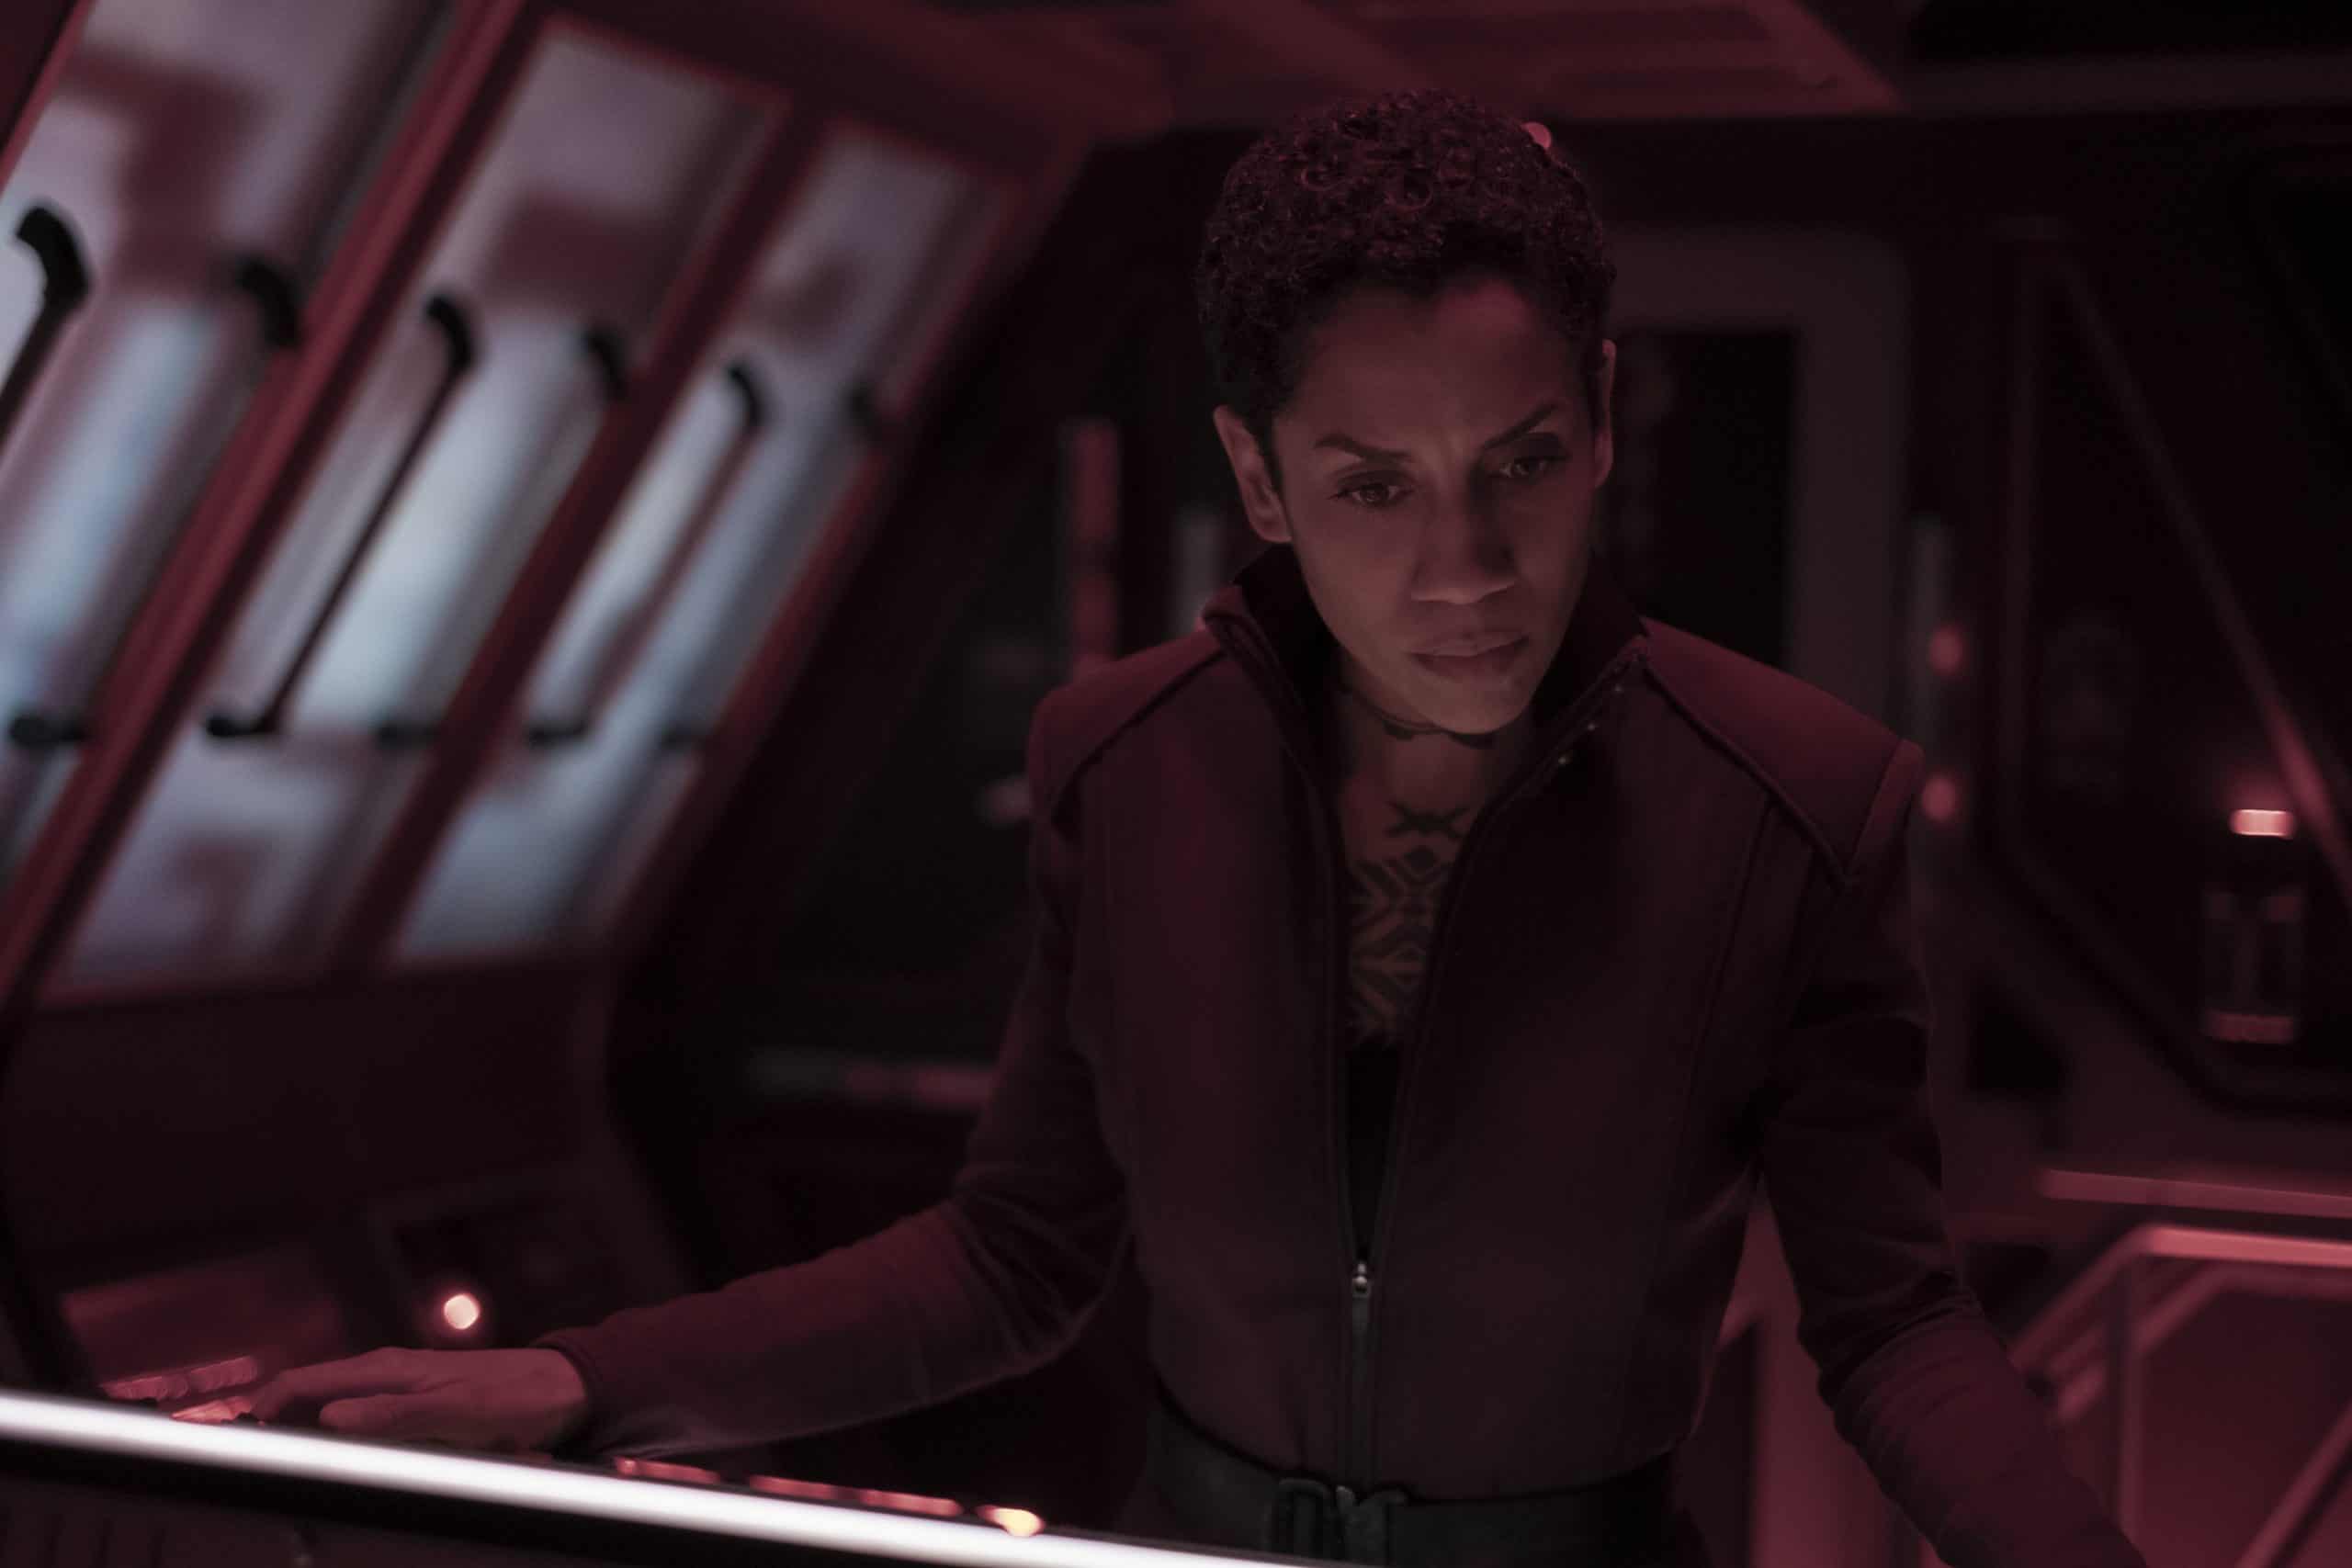 A still from The Expanse featuring the character Naomi Nagata